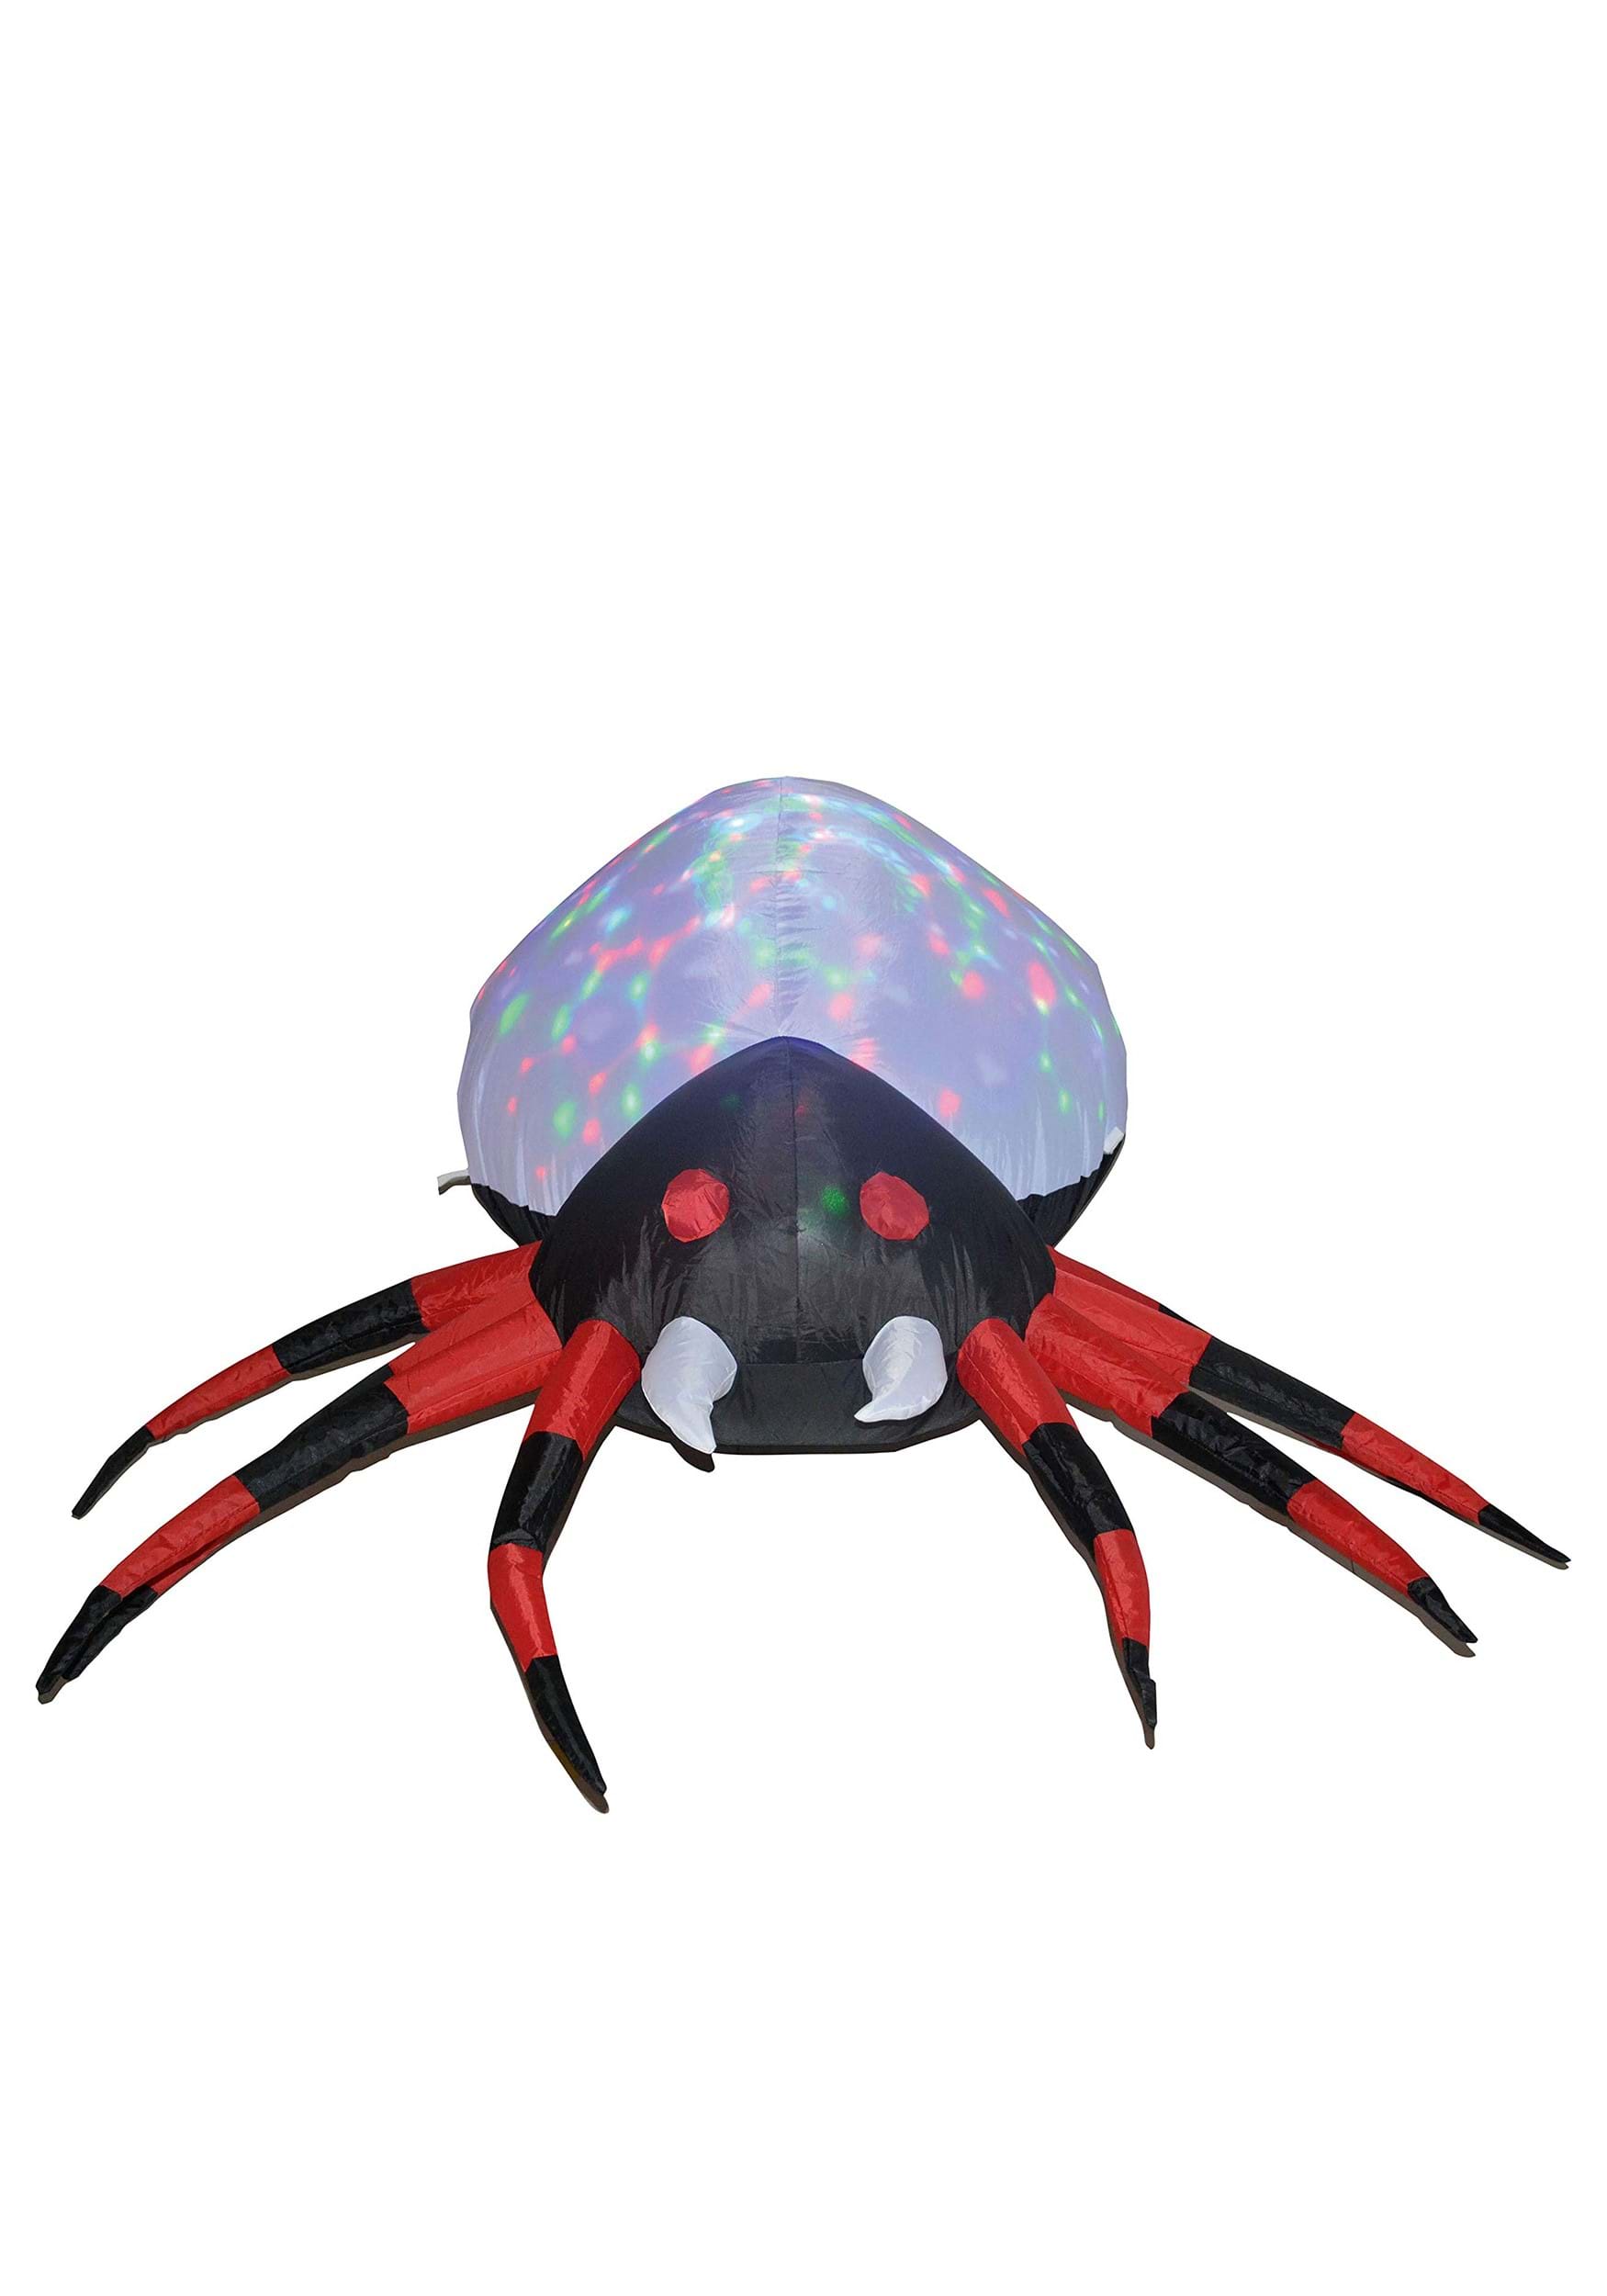 4 Foot Inflatable Projection Kaleidoscope Spider Decoration , Halloween Inflatables